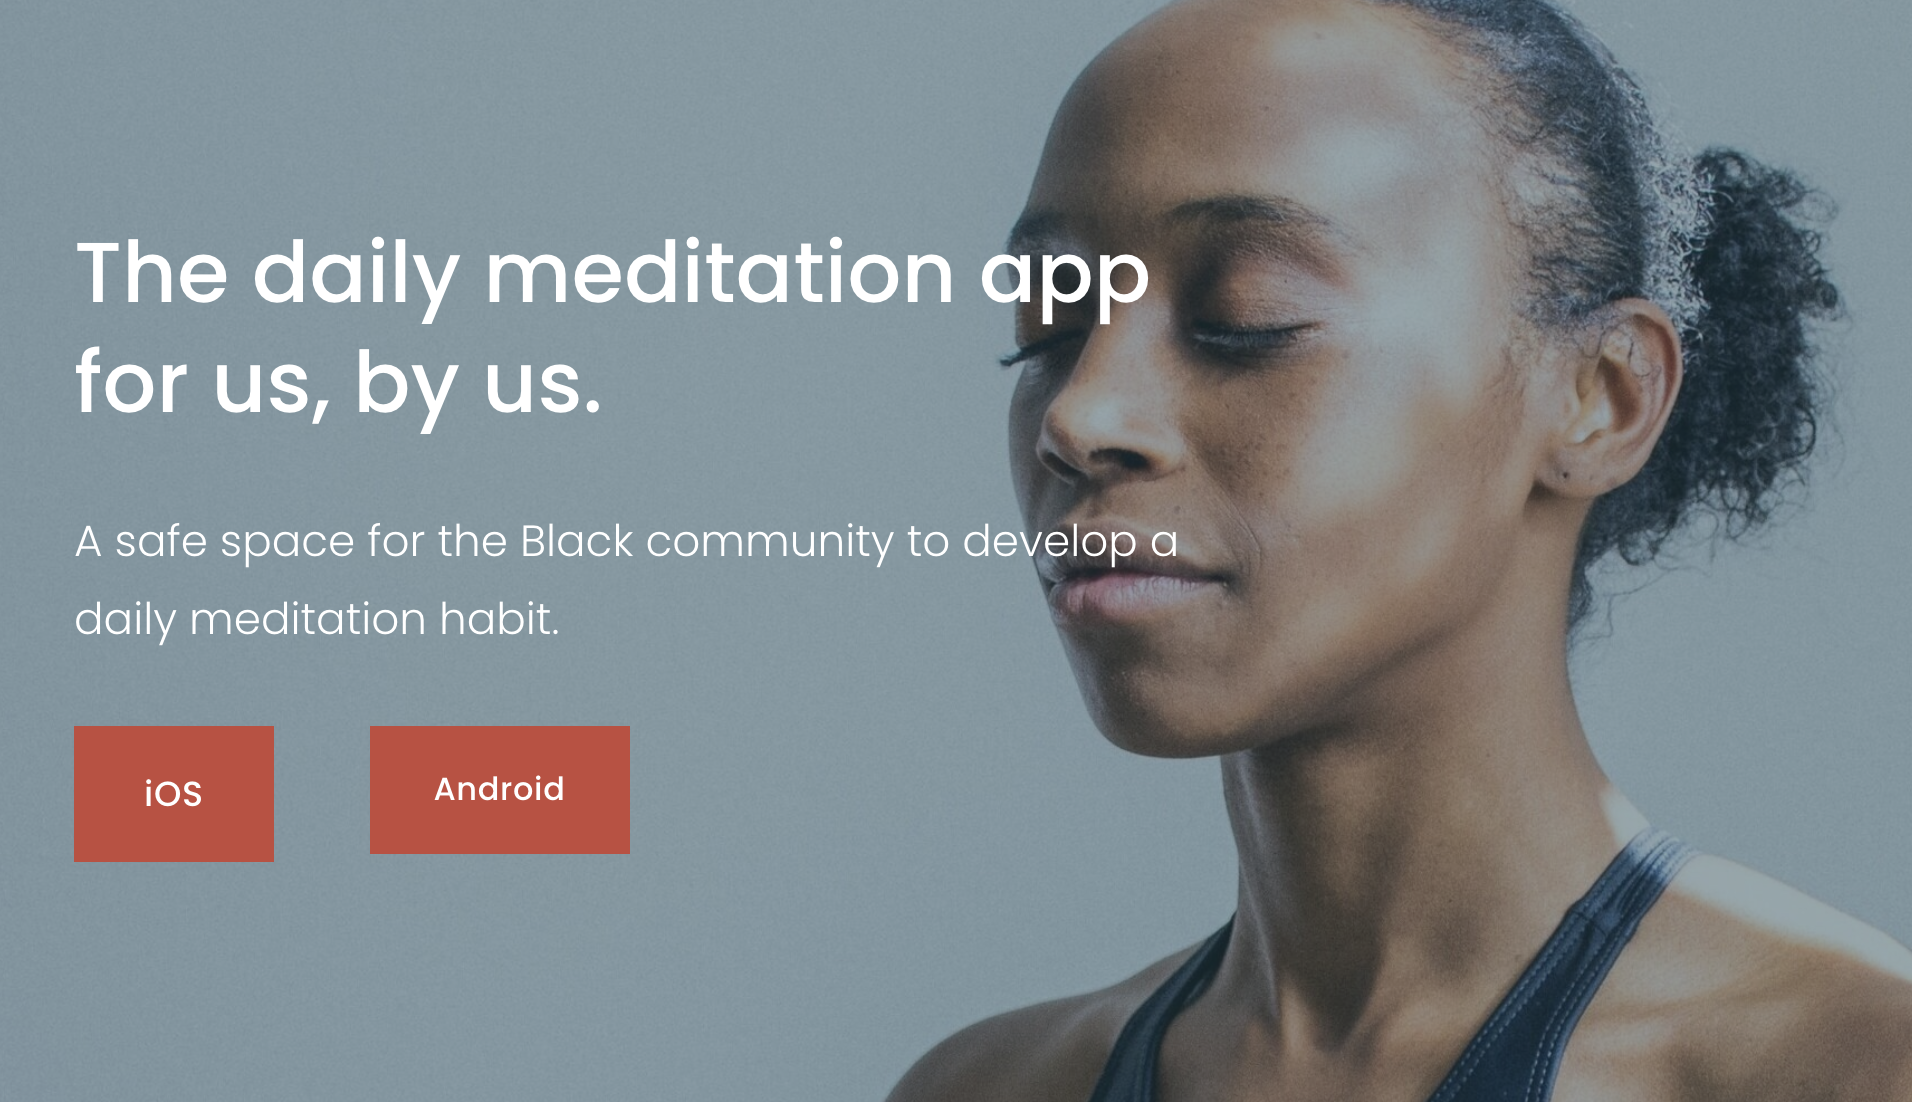 A model meditating next to the text introducing the app 